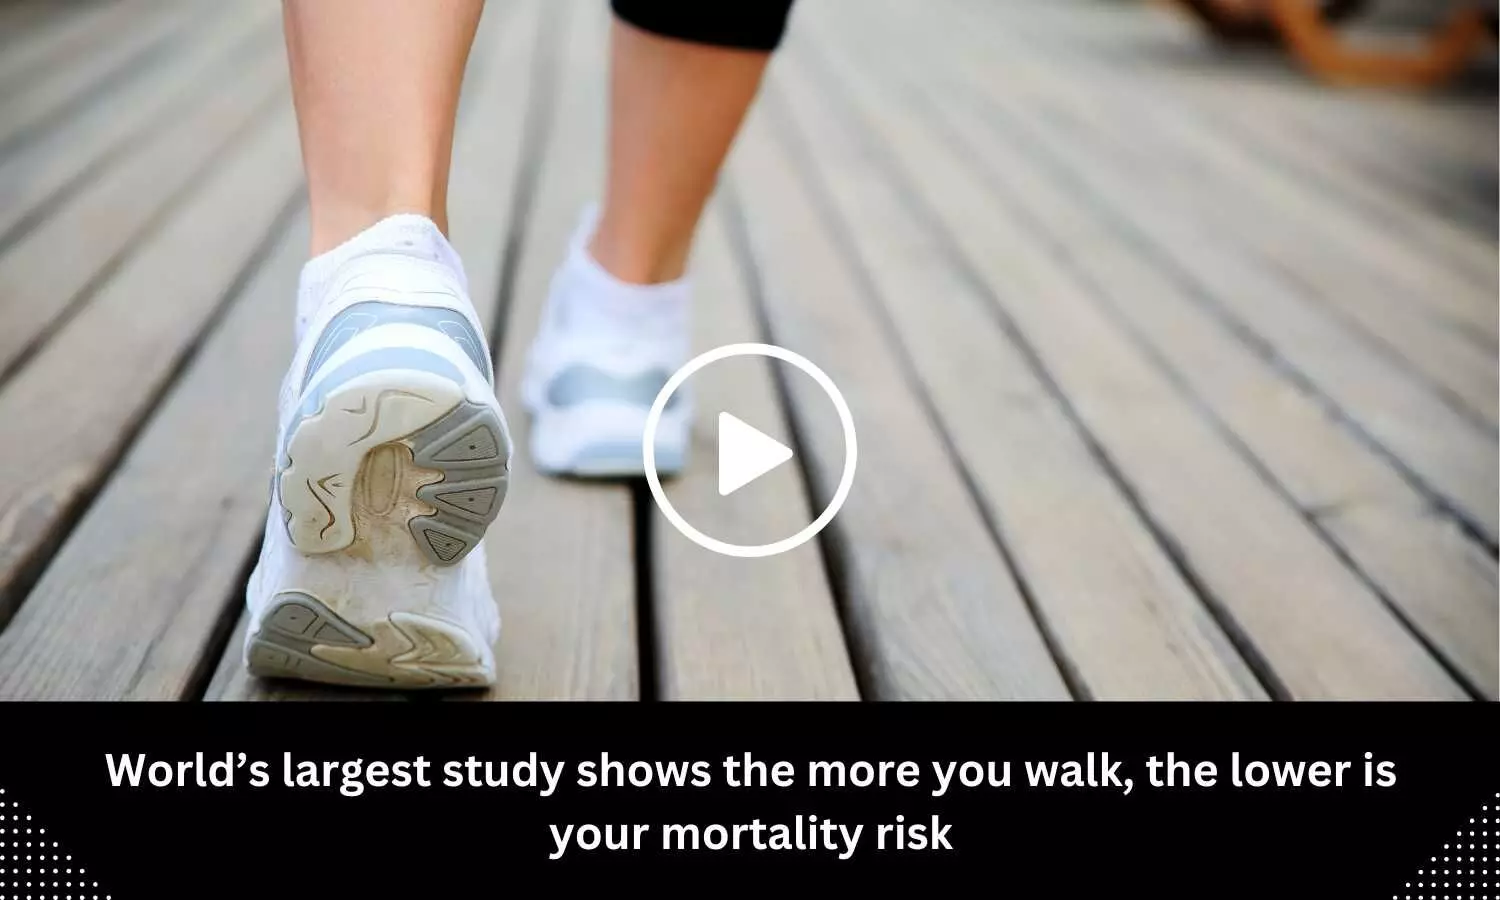 Worlds largest study shows the more you walk, the lower is your mortality risk